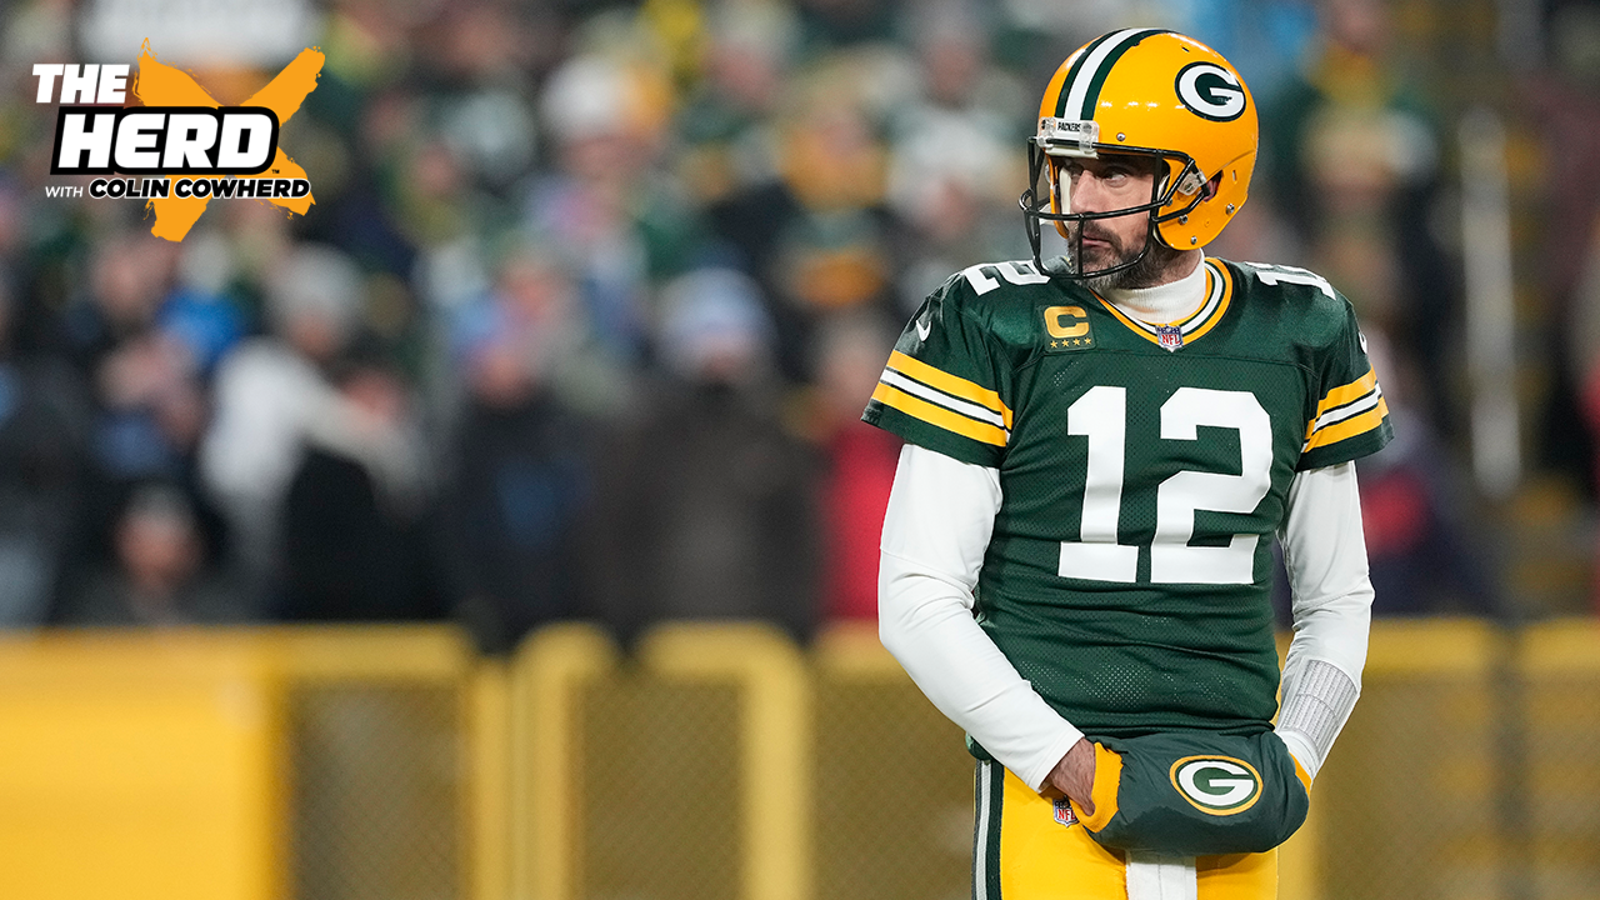 Has Rodgers played his last game in Green Bay?